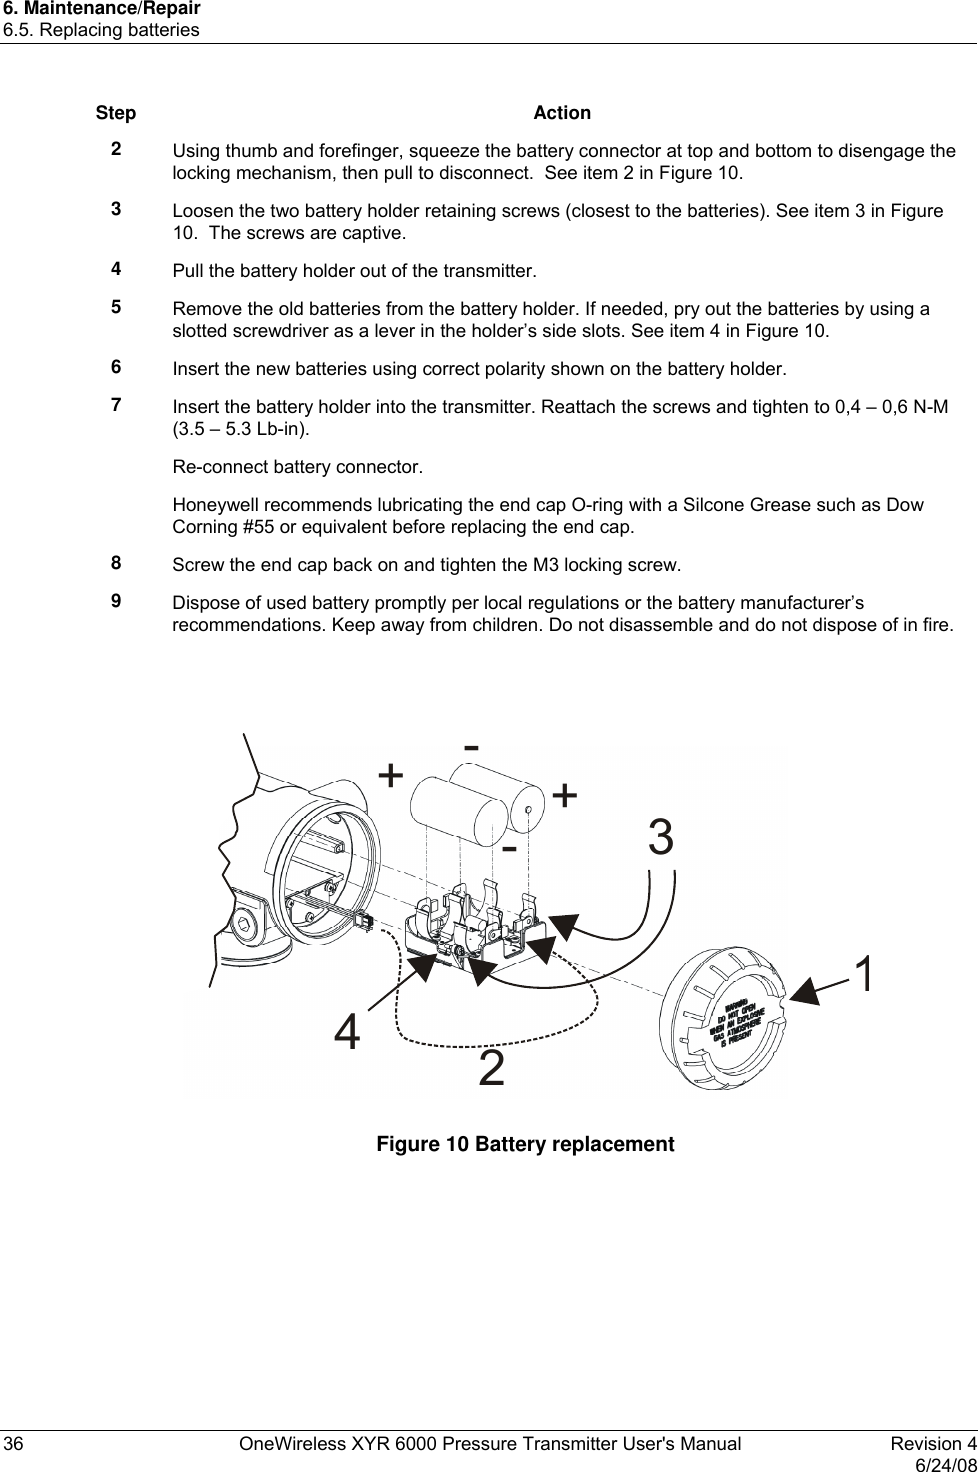 6. Maintenance/Repair 6.5. Replacing batteries 36  OneWireless XYR 6000 Pressure Transmitter User&apos;s Manual   Revision 4   6/24/08 Step Action 2  Using thumb and forefinger, squeeze the battery connector at top and bottom to disengage the locking mechanism, then pull to disconnect.  See item 2 in Figure 10. 3  Loosen the two battery holder retaining screws (closest to the batteries). See item 3 in Figure 10.  The screws are captive. 4  Pull the battery holder out of the transmitter. 5  Remove the old batteries from the battery holder. If needed, pry out the batteries by using a slotted screwdriver as a lever in the holder’s side slots. See item 4 in Figure 10. 6  Insert the new batteries using correct polarity shown on the battery holder. 7  Insert the battery holder into the transmitter. Reattach the screws and tighten to 0,4 – 0,6 N-M (3.5 – 5.3 Lb-in). Re-connect battery connector. Honeywell recommends lubricating the end cap O-ring with a Silcone Grease such as Dow Corning #55 or equivalent before replacing the end cap. 8  Screw the end cap back on and tighten the M3 locking screw. 9  Dispose of used battery promptly per local regulations or the battery manufacturer’s recommendations. Keep away from children. Do not disassemble and do not dispose of in fire.   12+-+-34  Figure 10 Battery replacement  